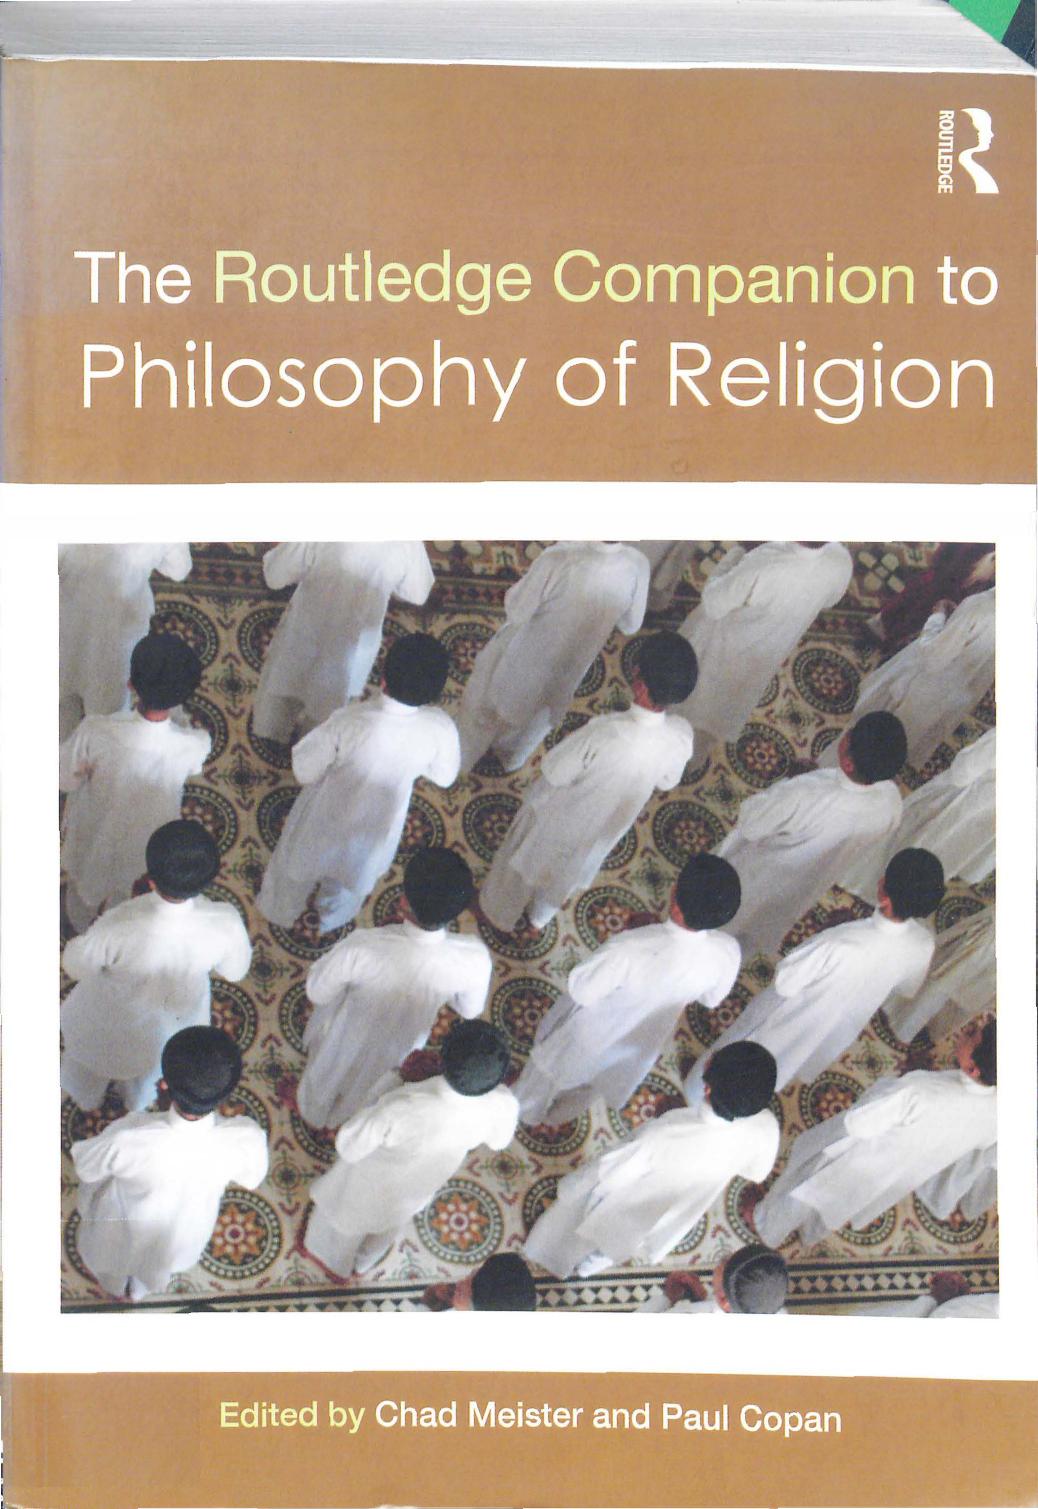 The Routledge Companion to Philosophy of Religion - Parts 1-4